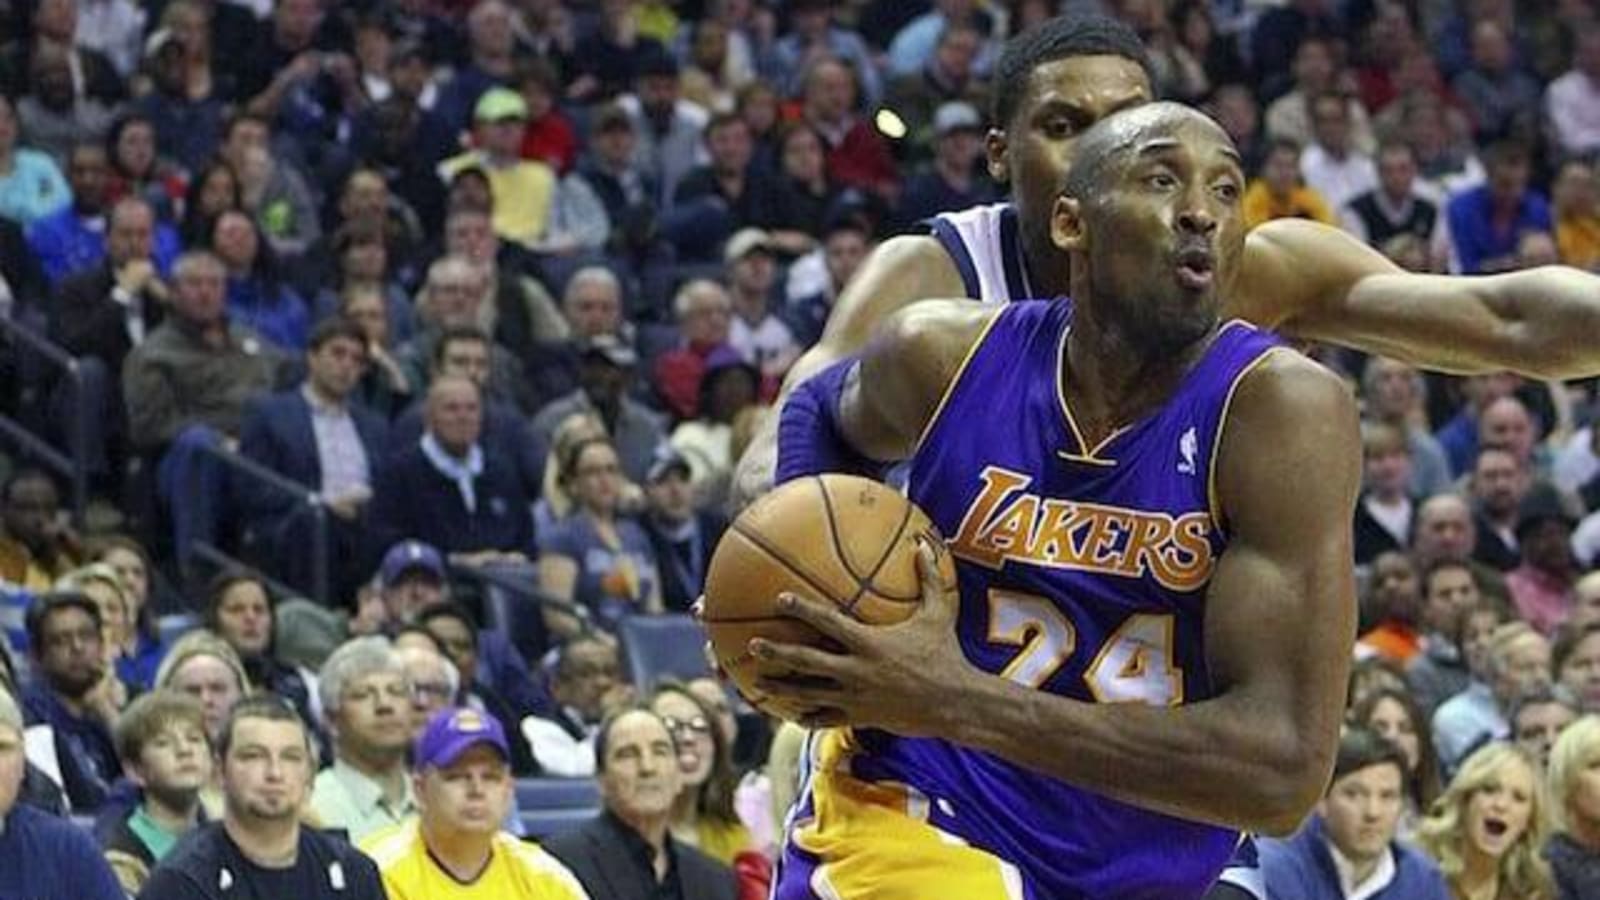 This Day In Lakers History: Kobe Bryant Drops 60 Points On Grizzlies To Extend Scoring Streak